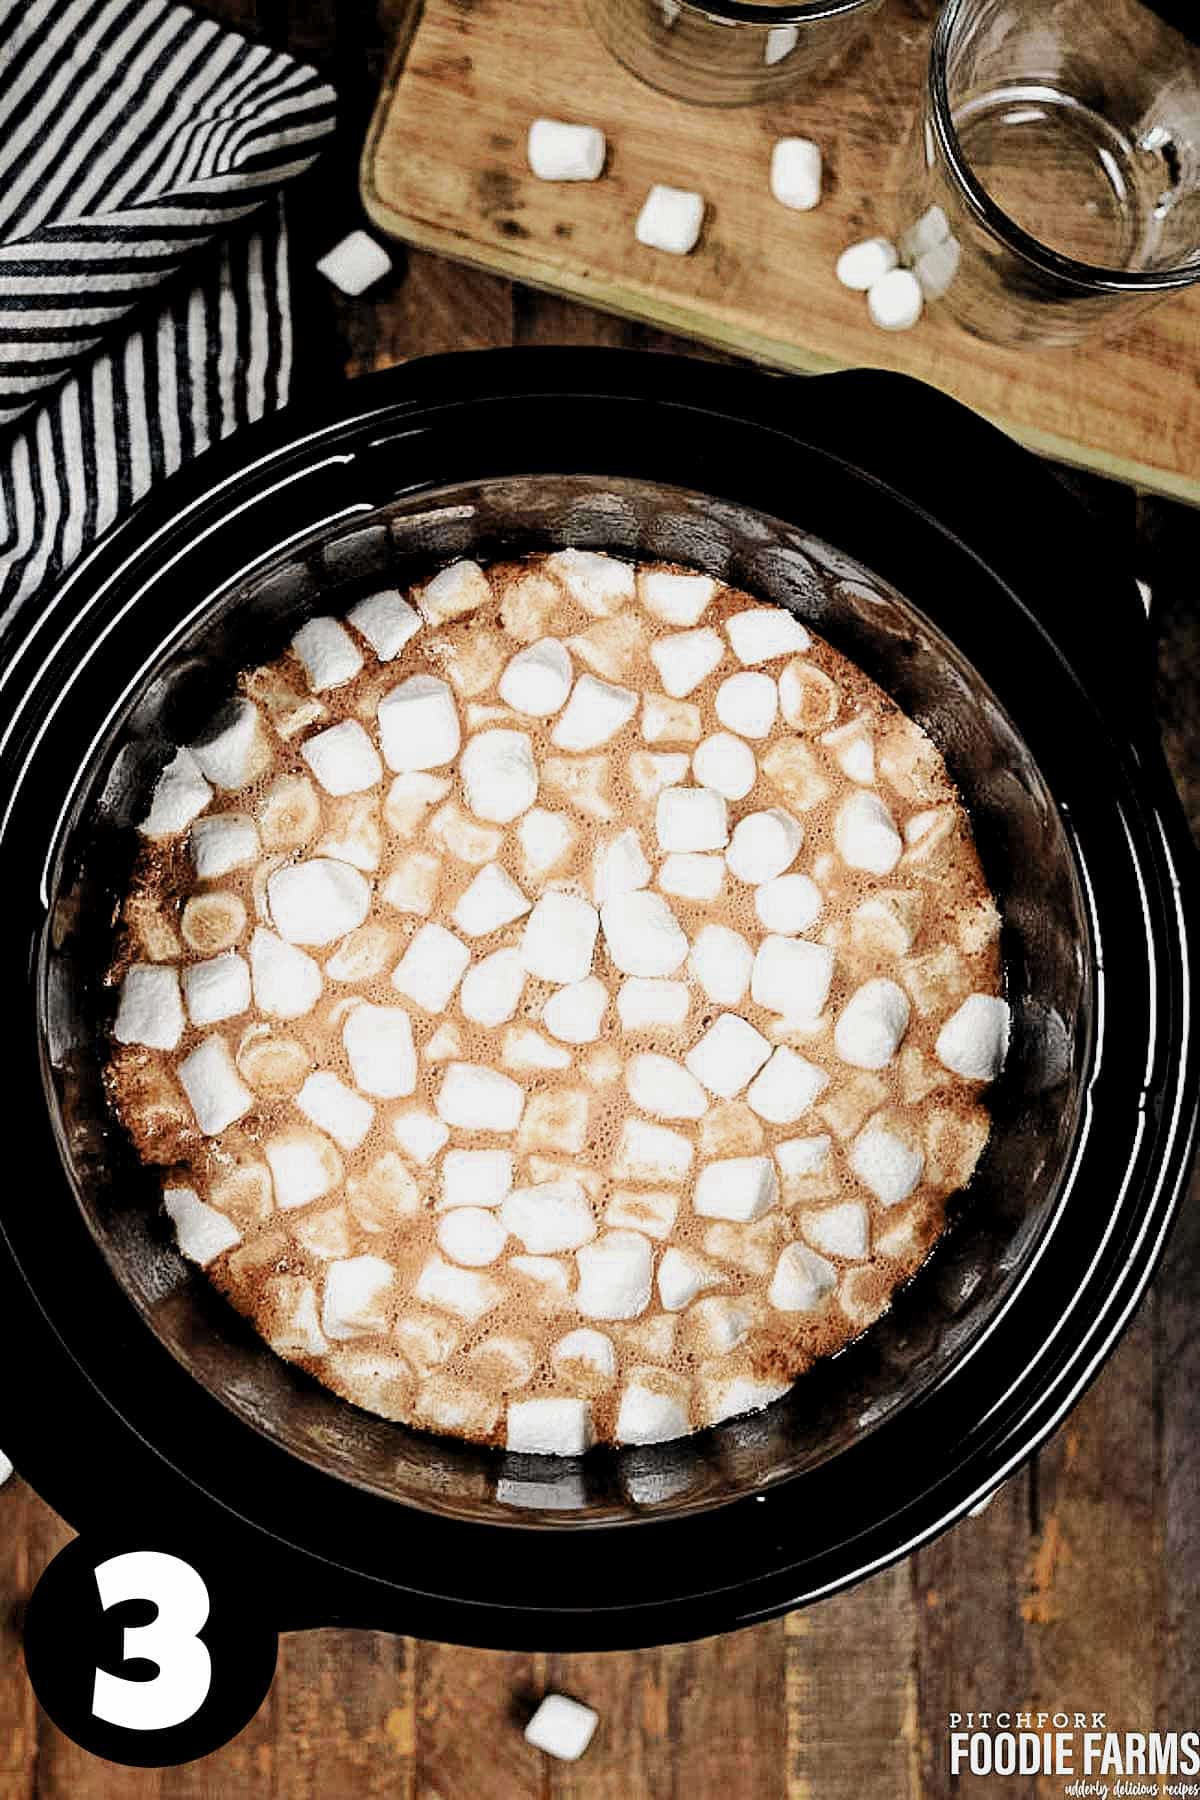 Hot chocolate made in a slow cooker topped with marshmallows.